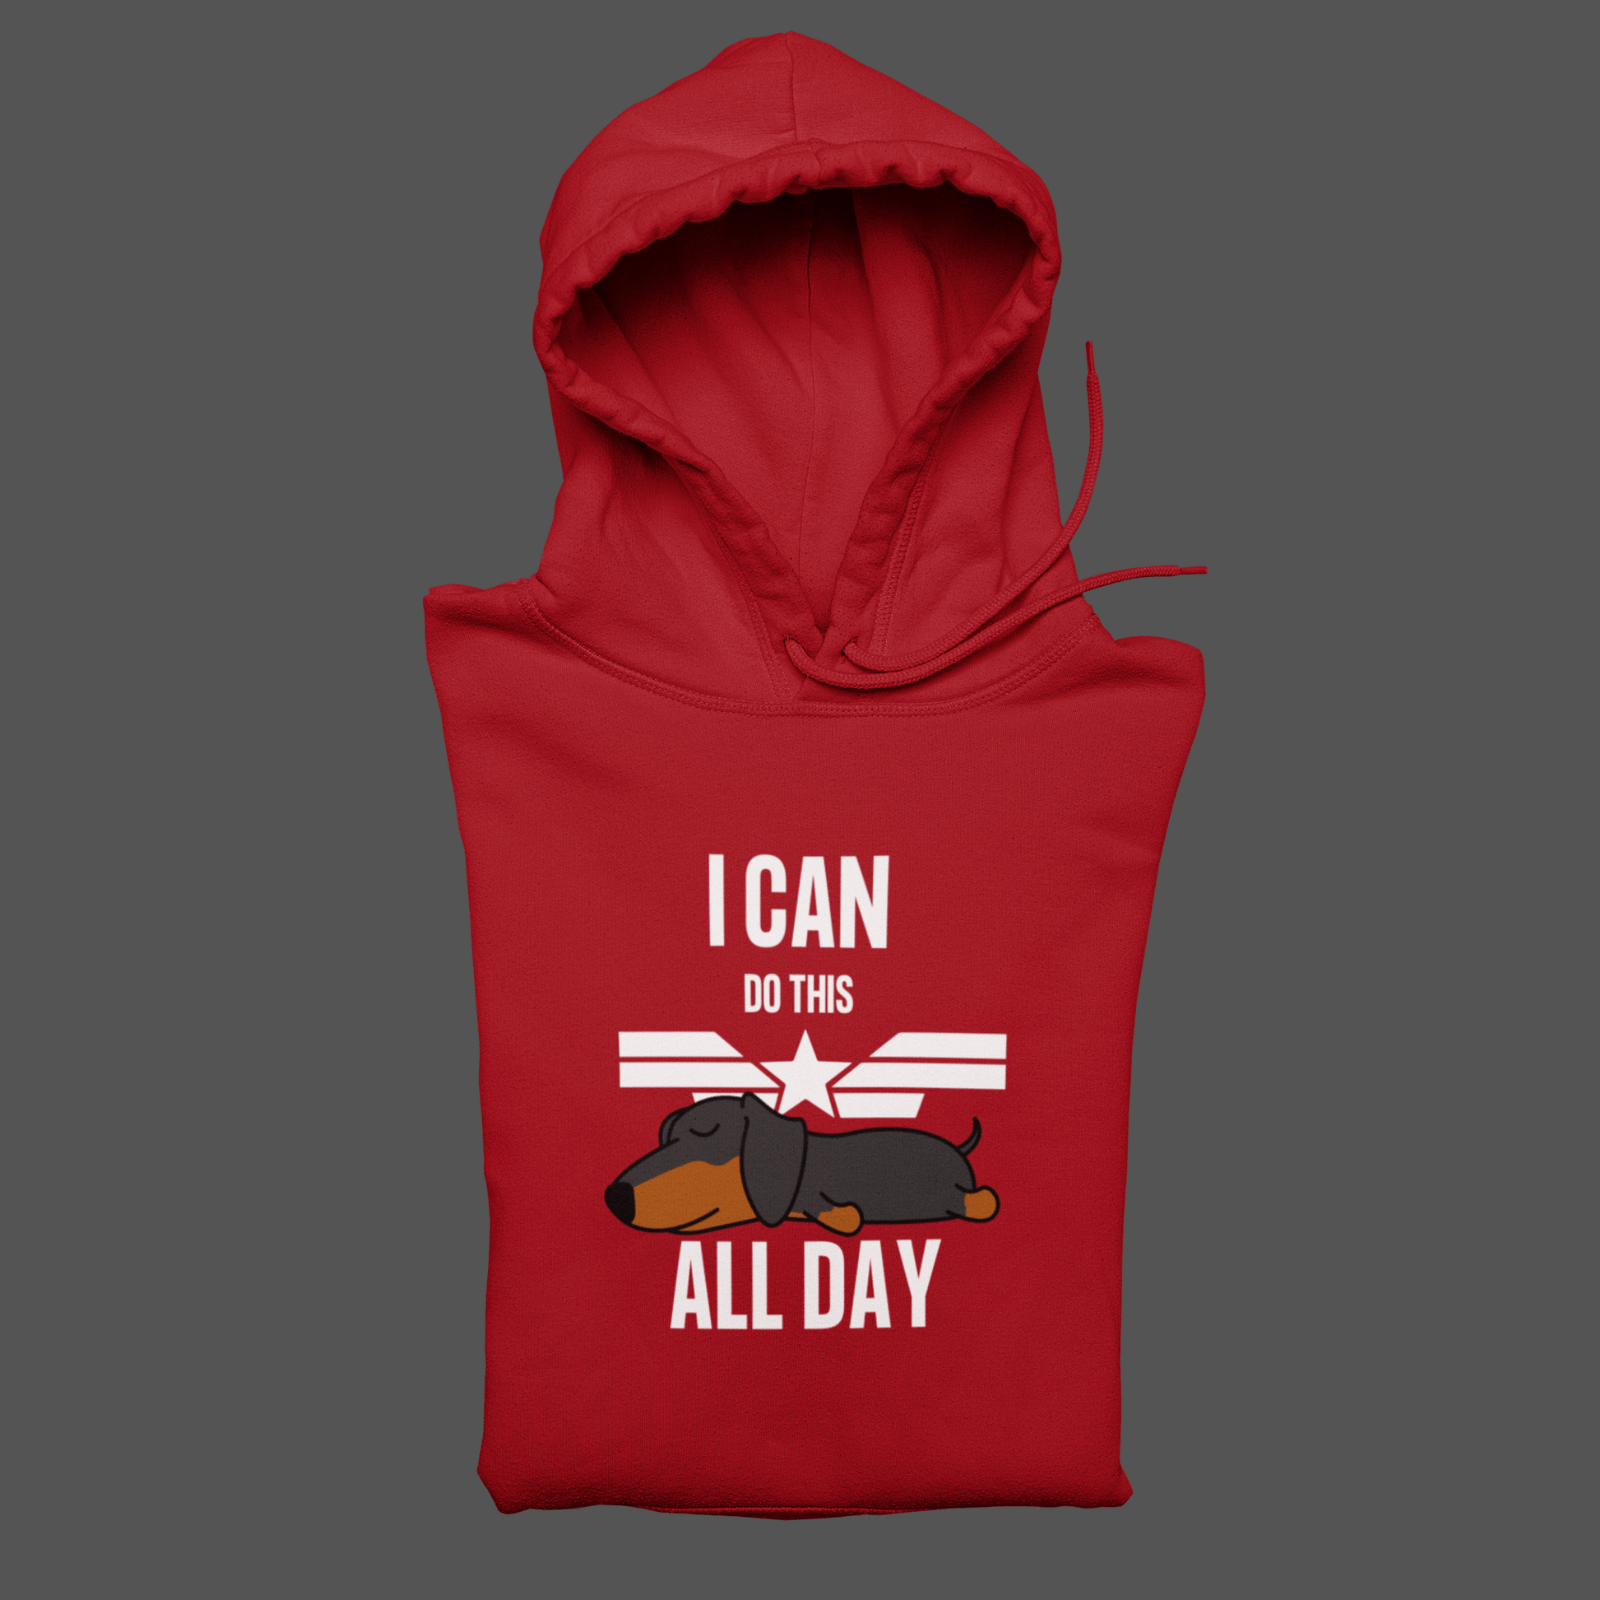 I Can Do This Hoodie - Ken Adams